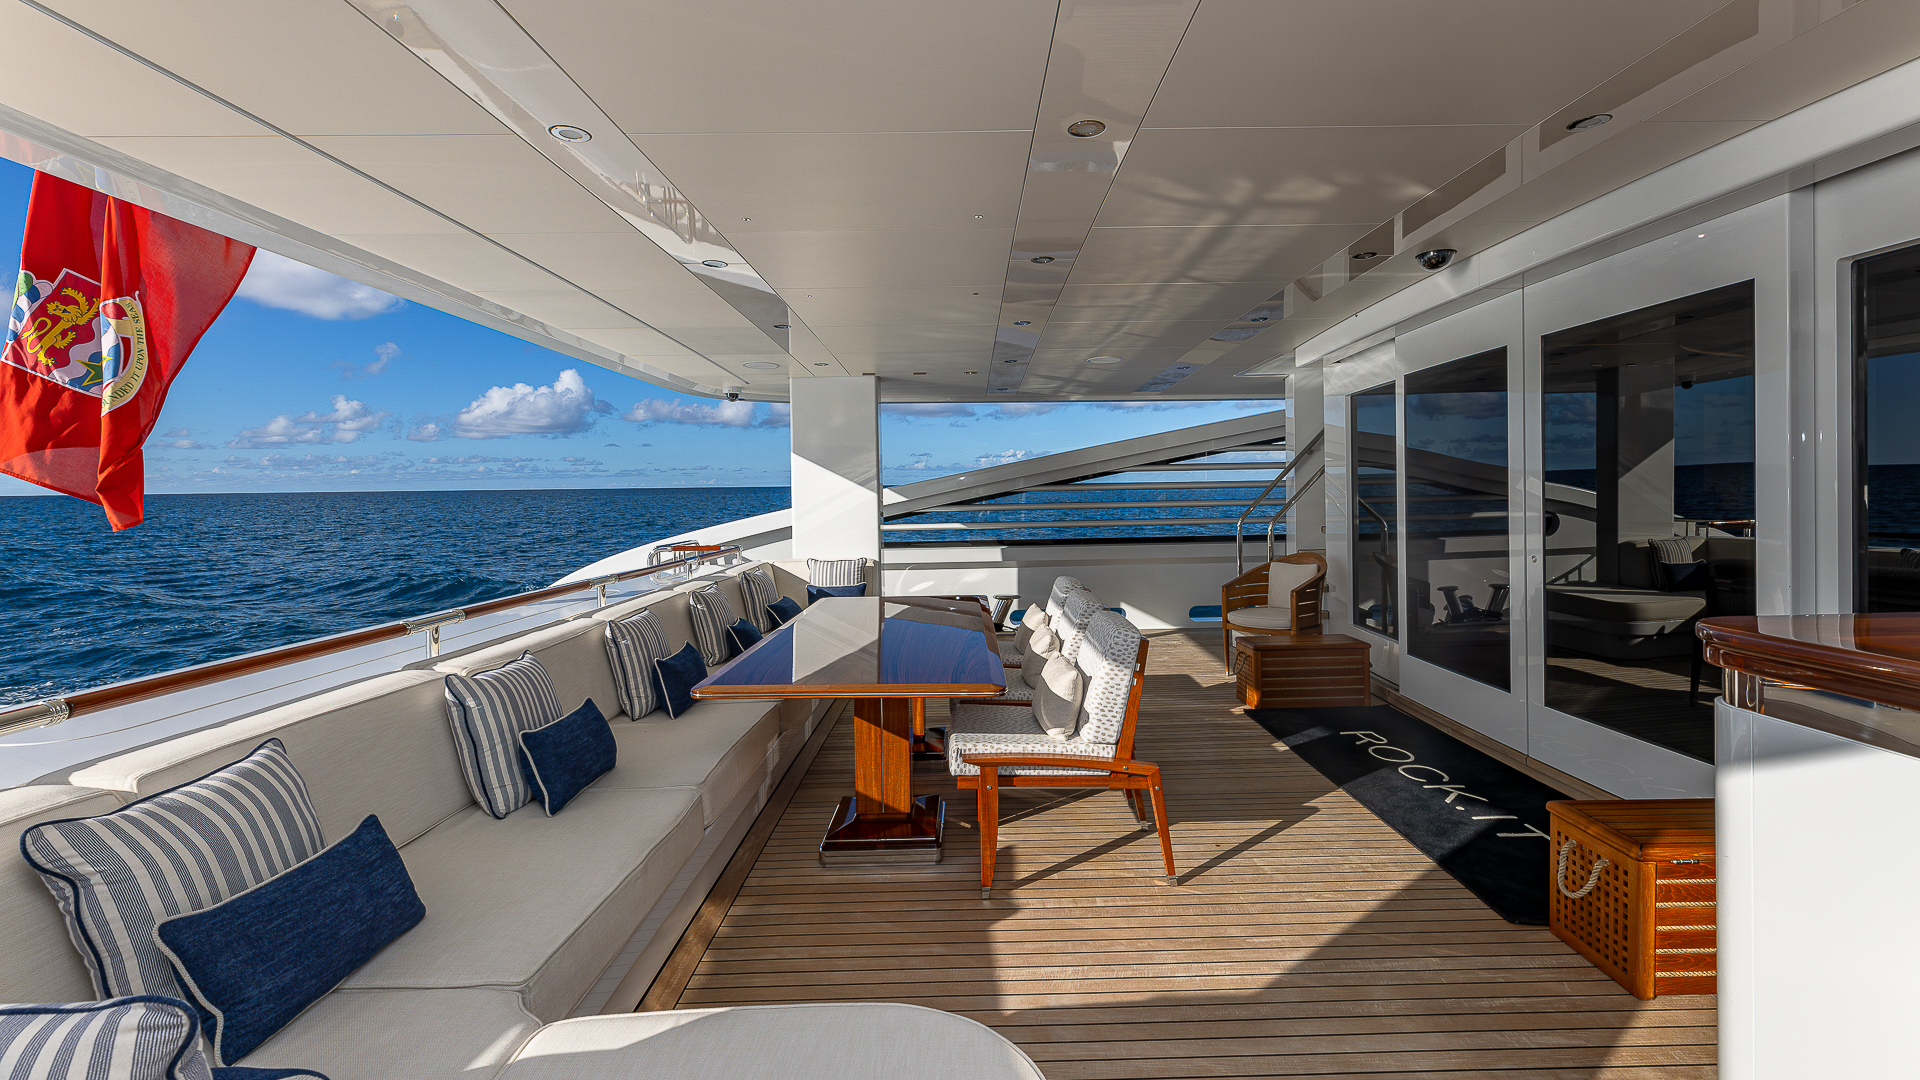 Rock It Main Deck - Aft Credit Yachting Image